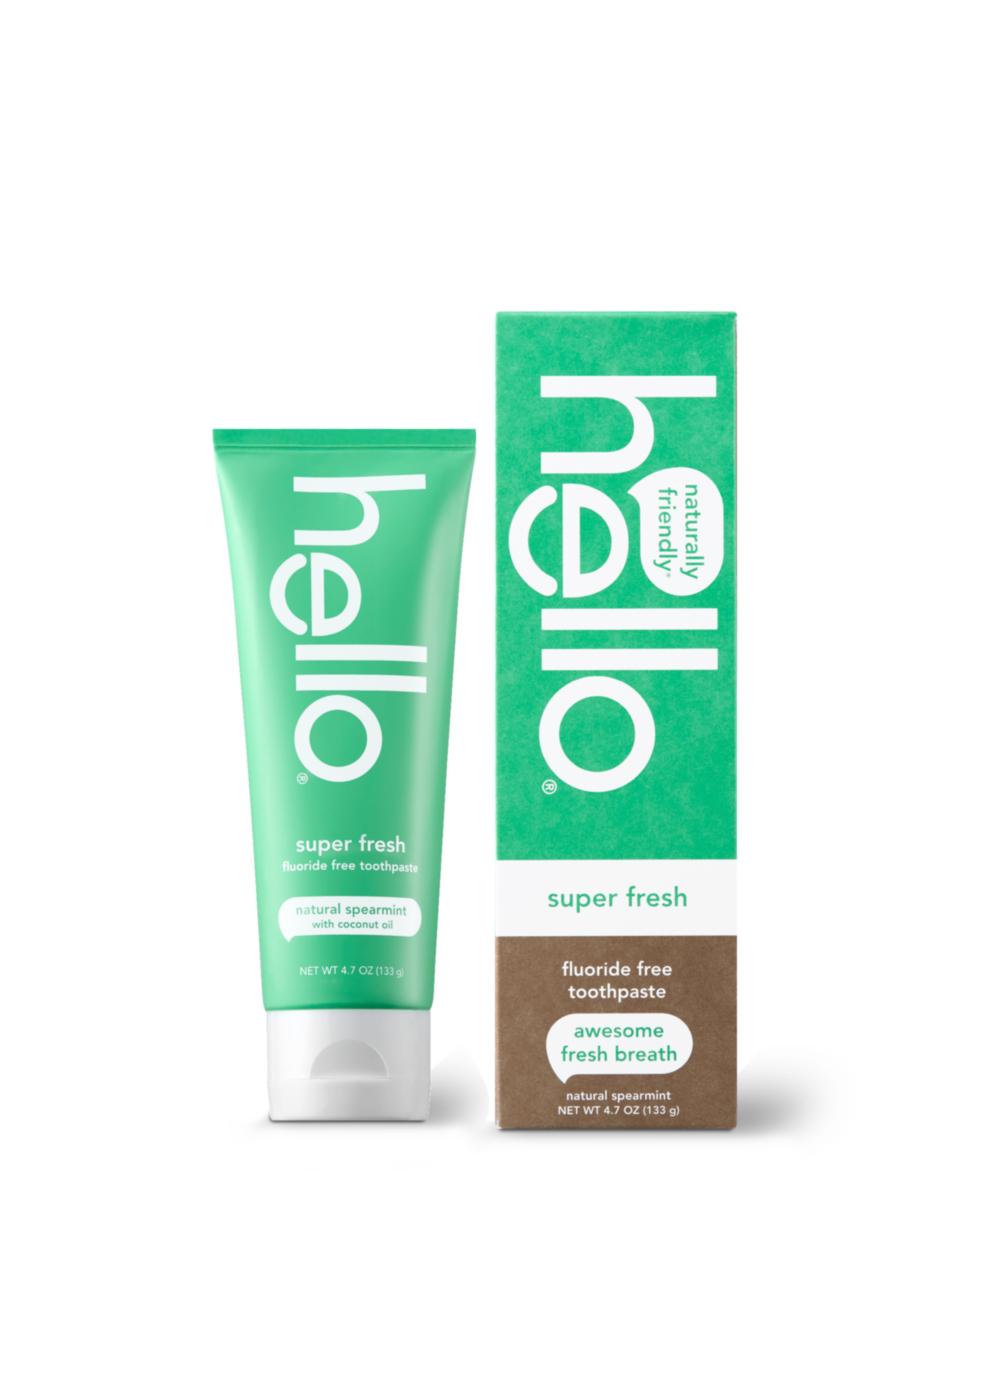 Hello Super Fresh Fluoride Free Toothpaste - Natural Spearmint; image 4 of 4